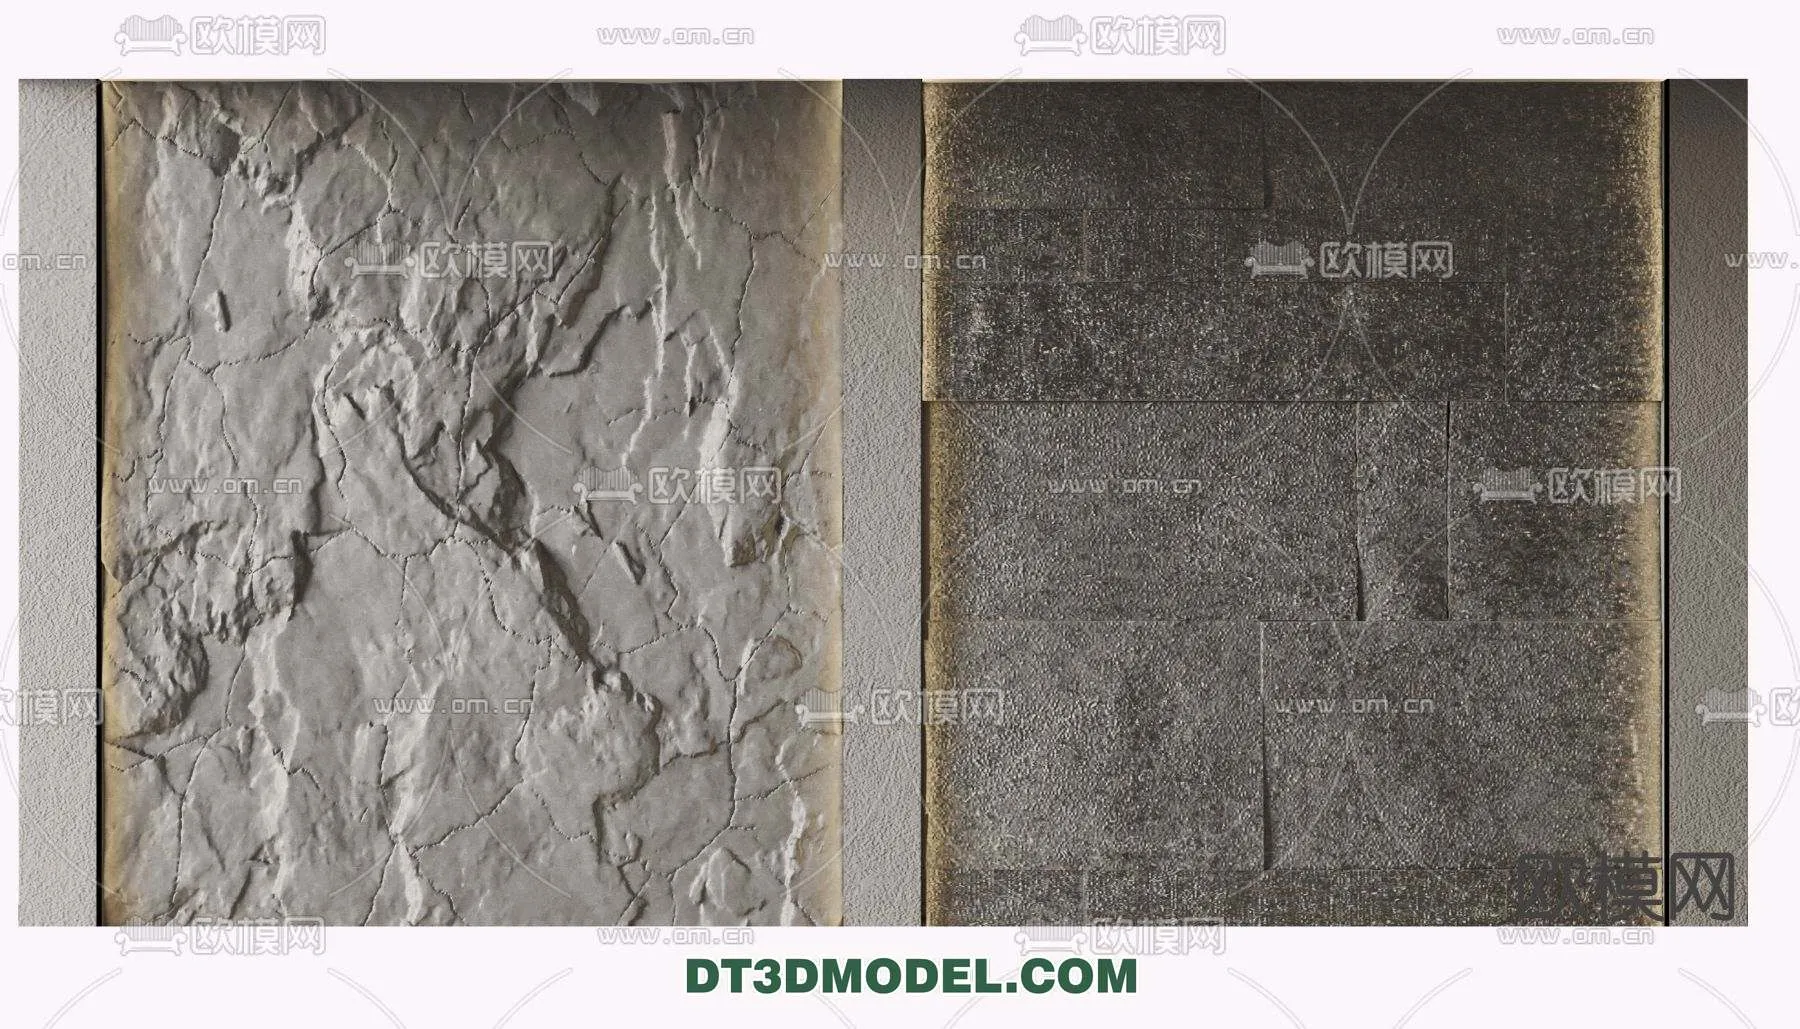 MATERIAL – TEXTURES – ROCK WALL – 0025